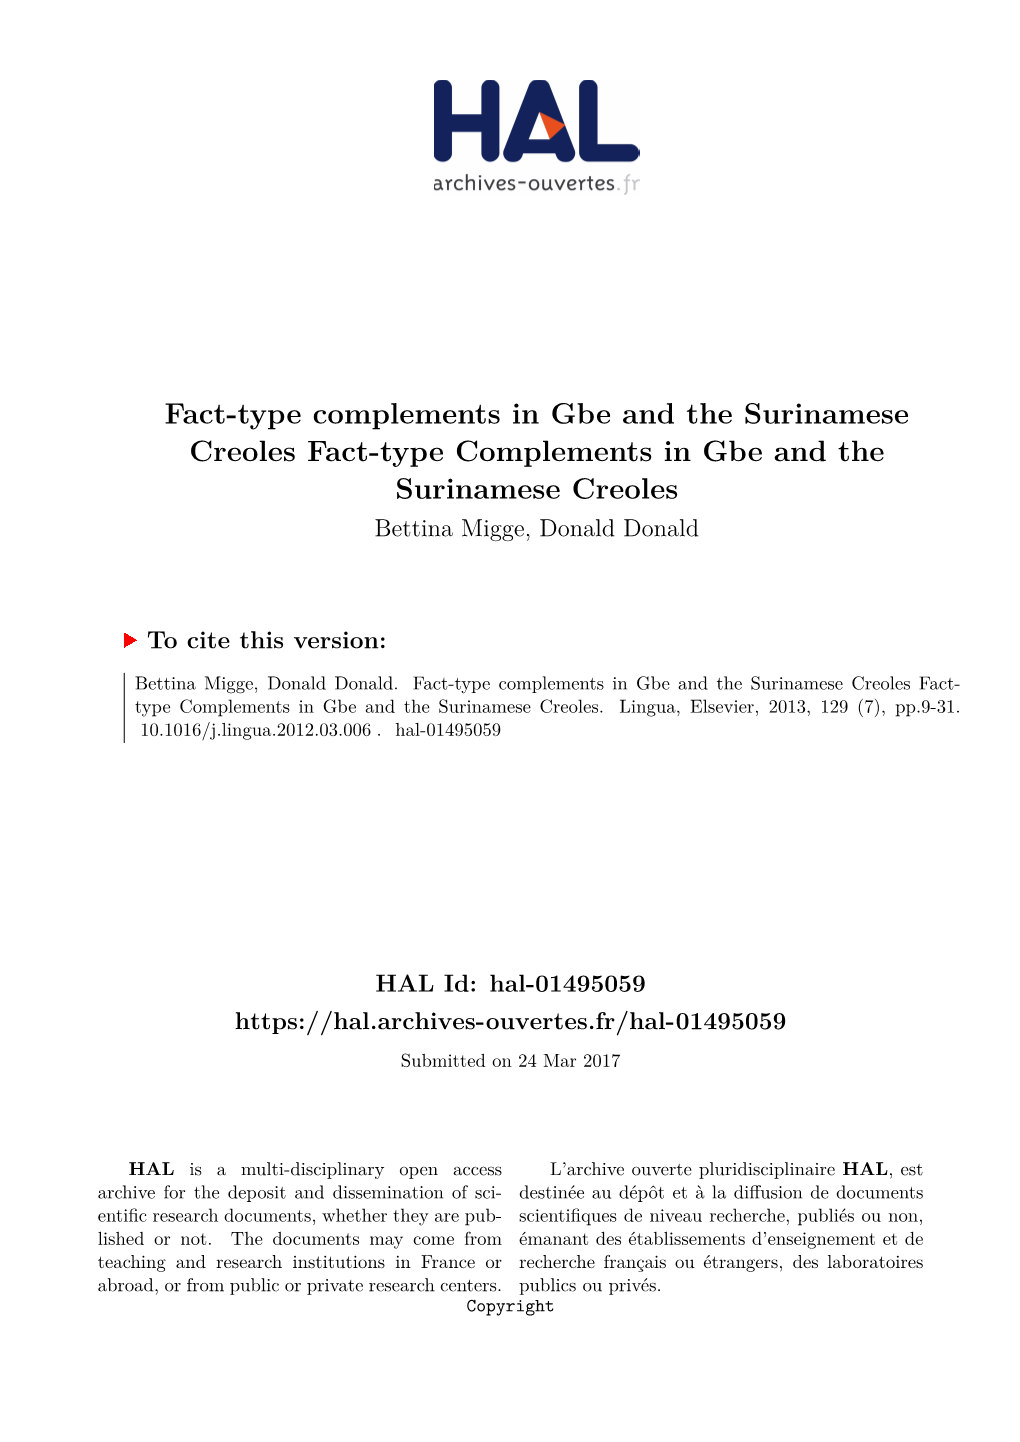 Fact-Type Complements in Gbe and the Surinamese Creoles Fact-Type Complements in Gbe and the Surinamese Creoles Bettina Migge, Donald Donald